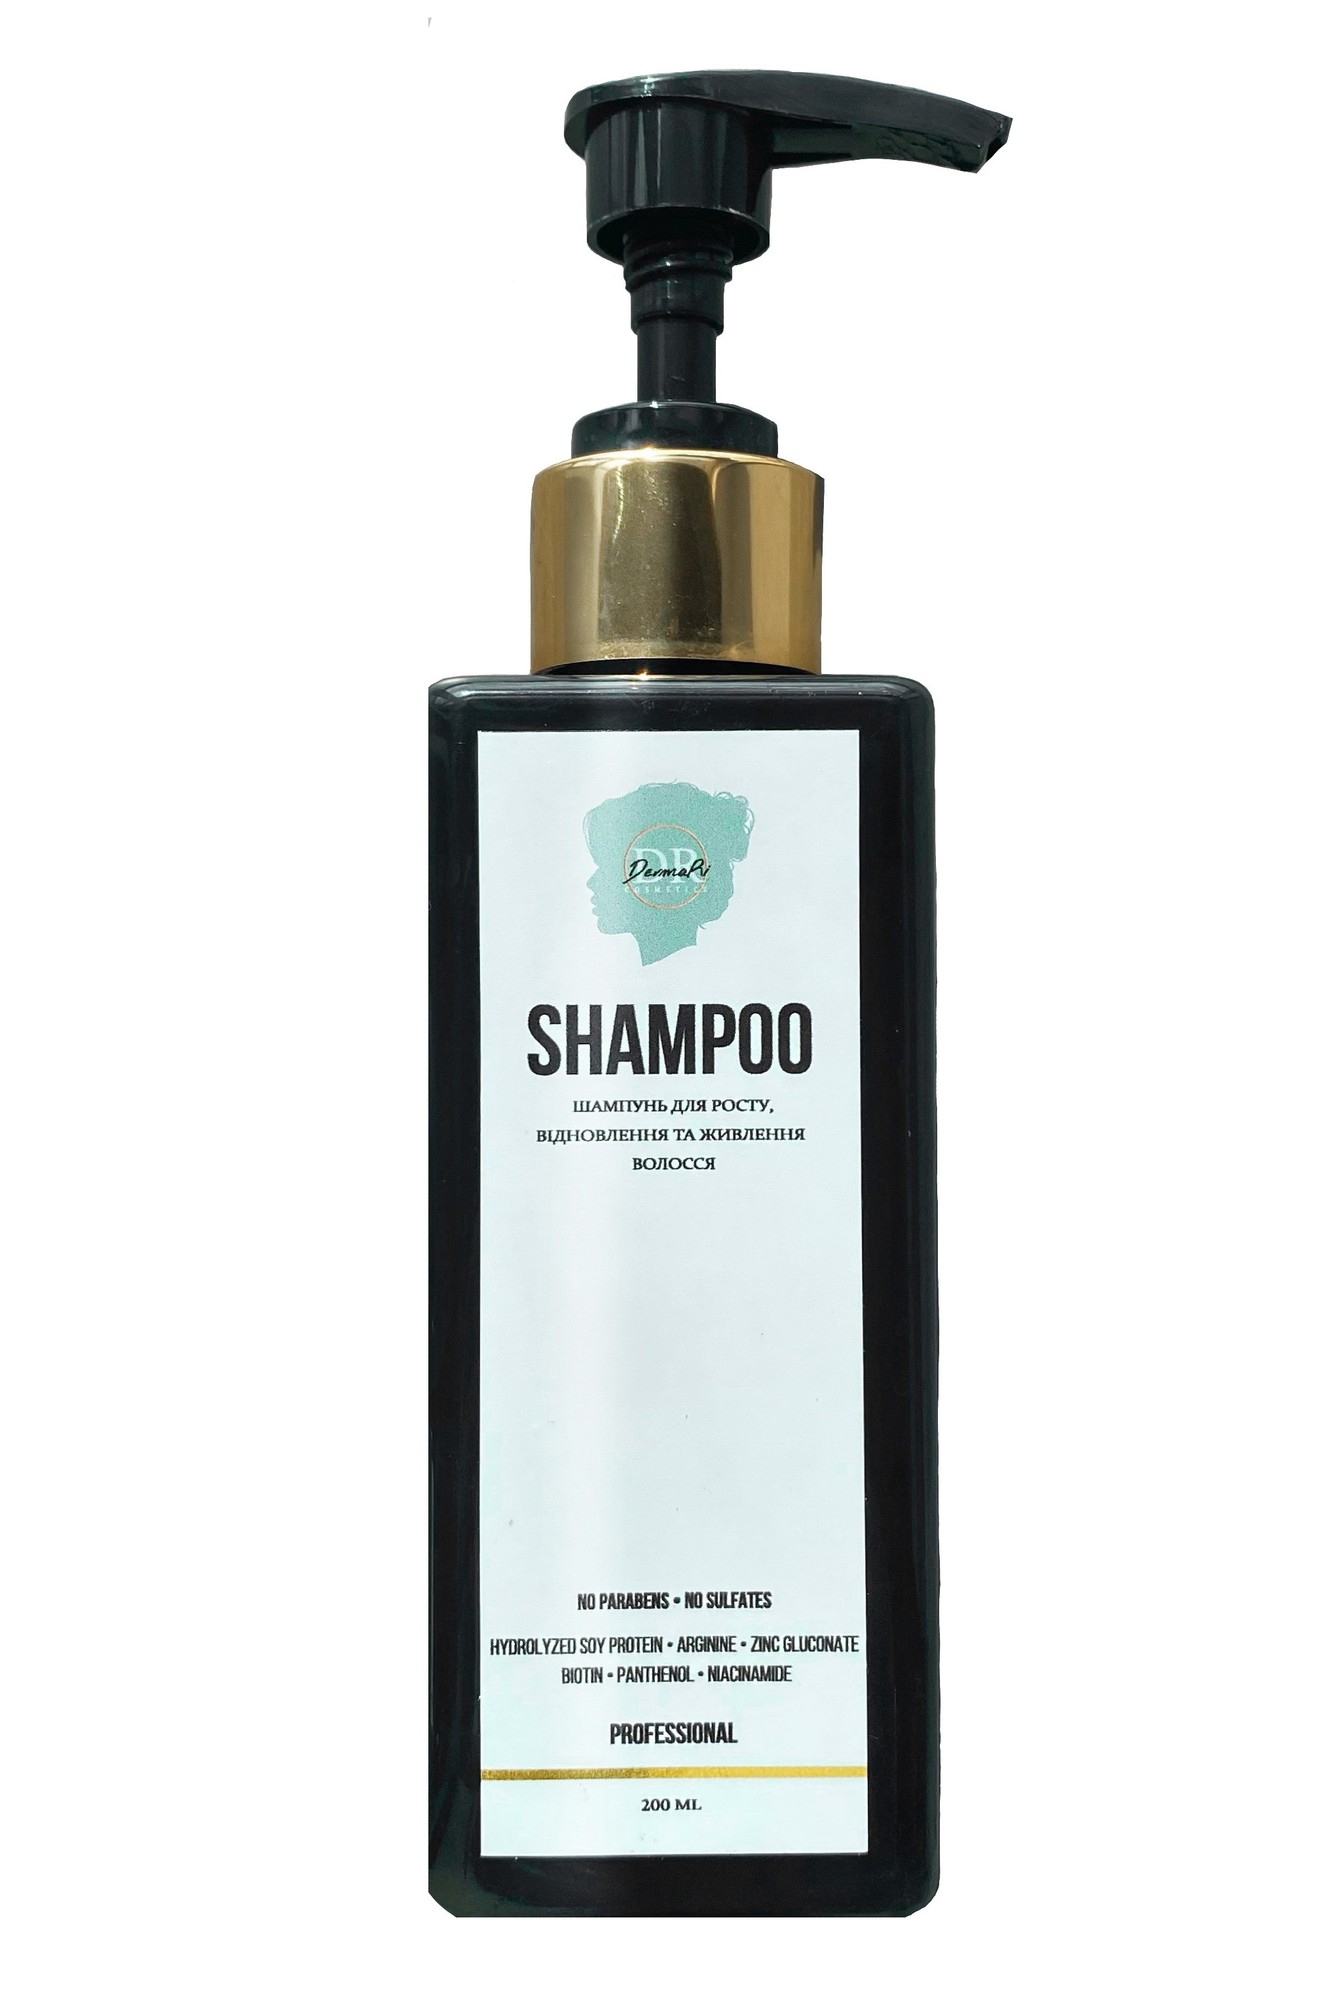 Shampoo for hair growth, restoration and nutrition, 200 ml - 17111 from  DermaRi COSMETICS with donate to u24